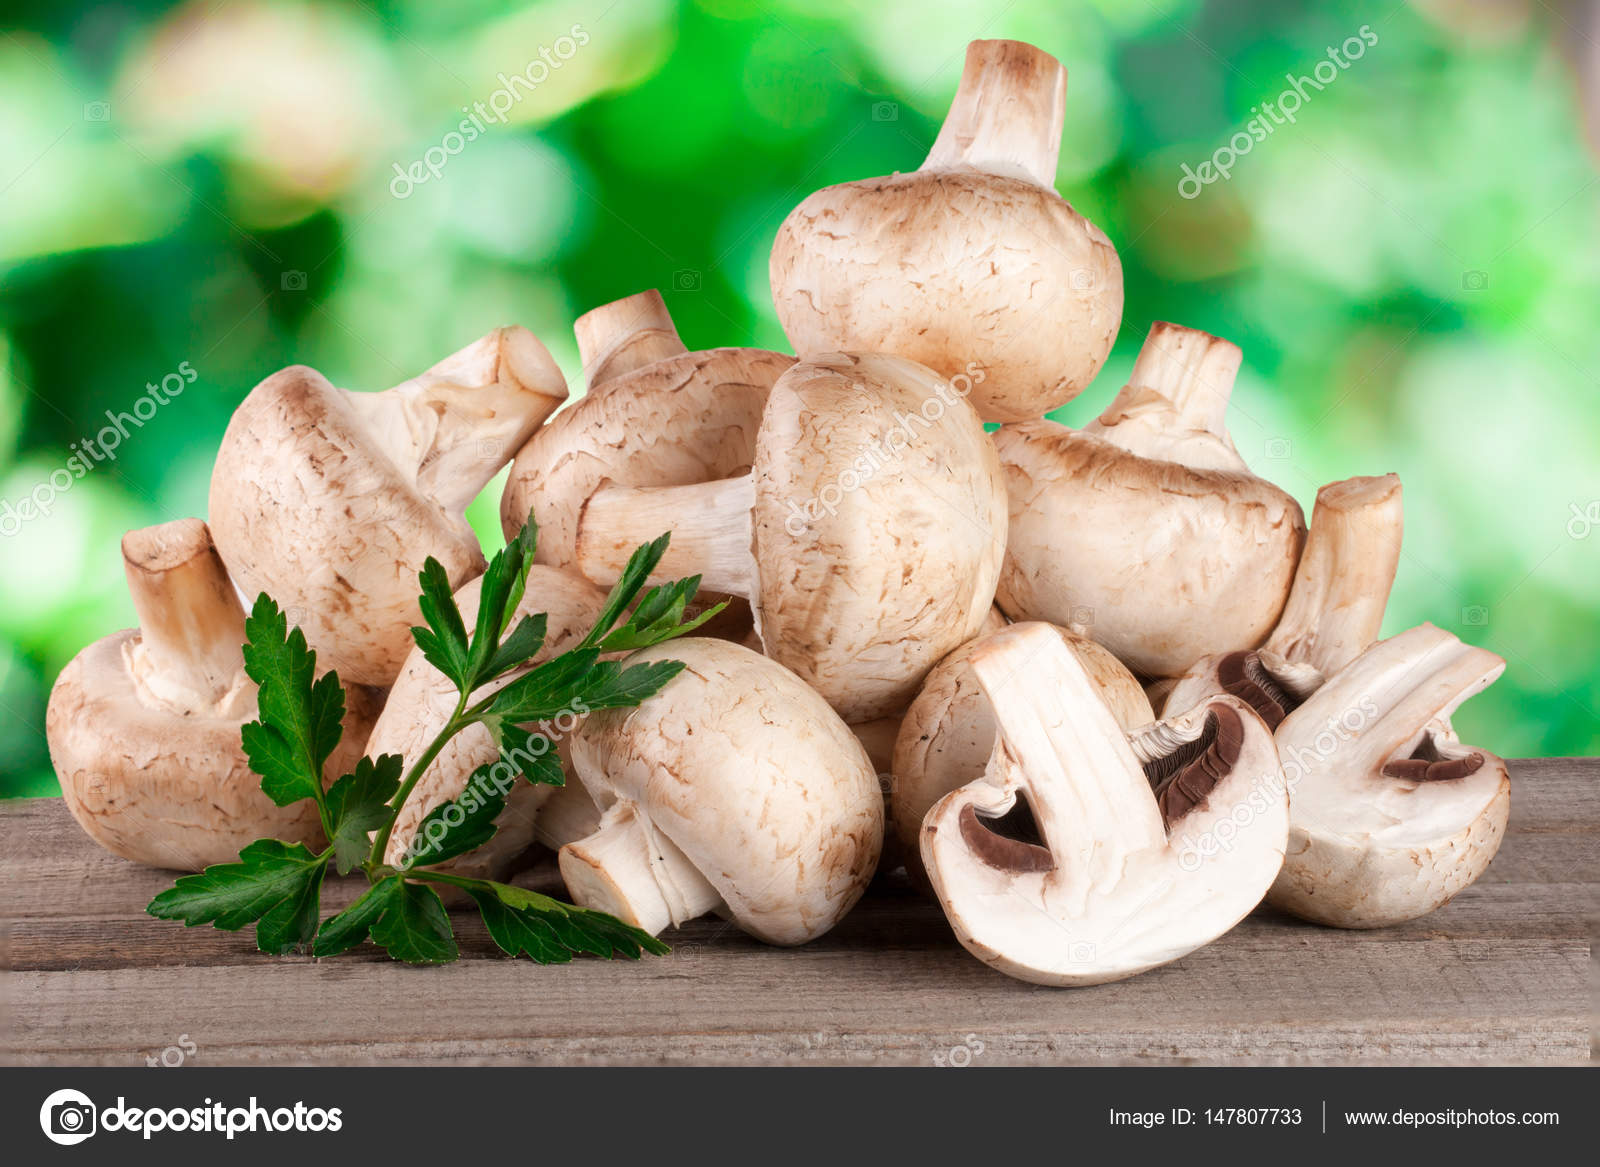 Champignon Mushrooms On Wooden Table With Blurred Garden